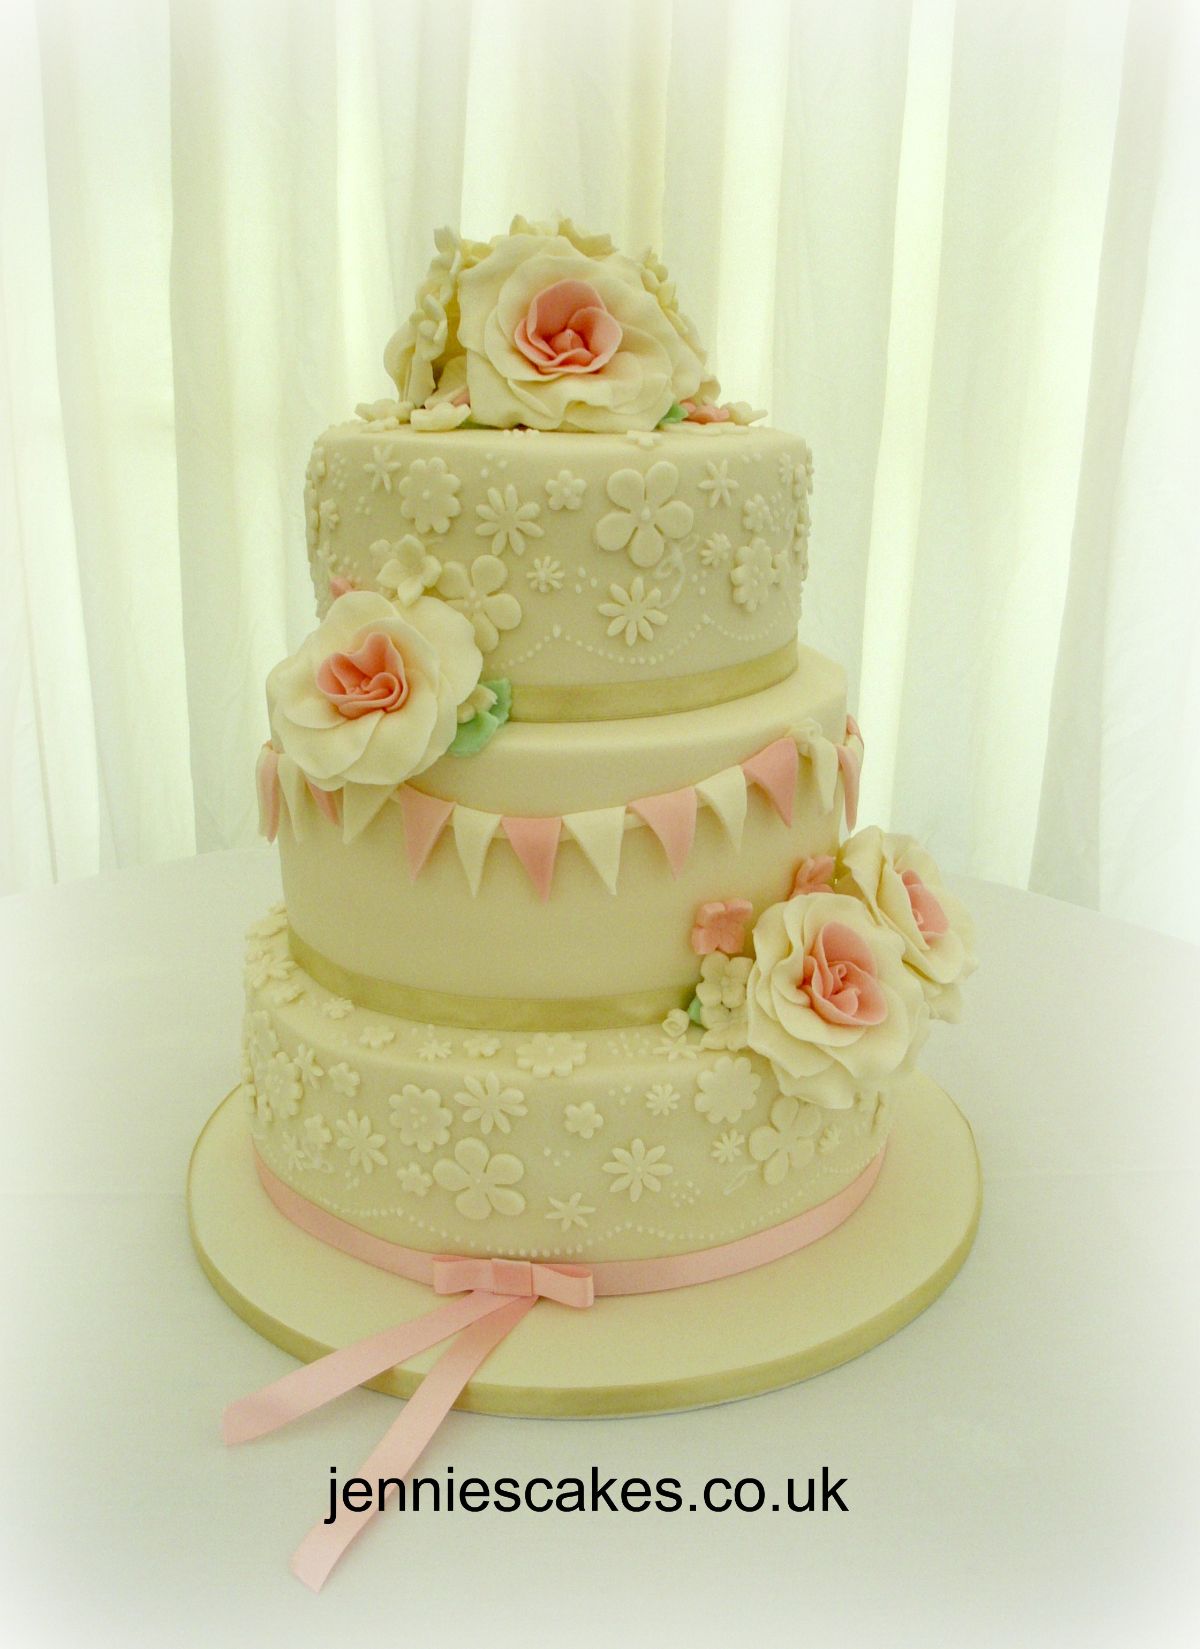 Jennie's cake's and catering-Image-51